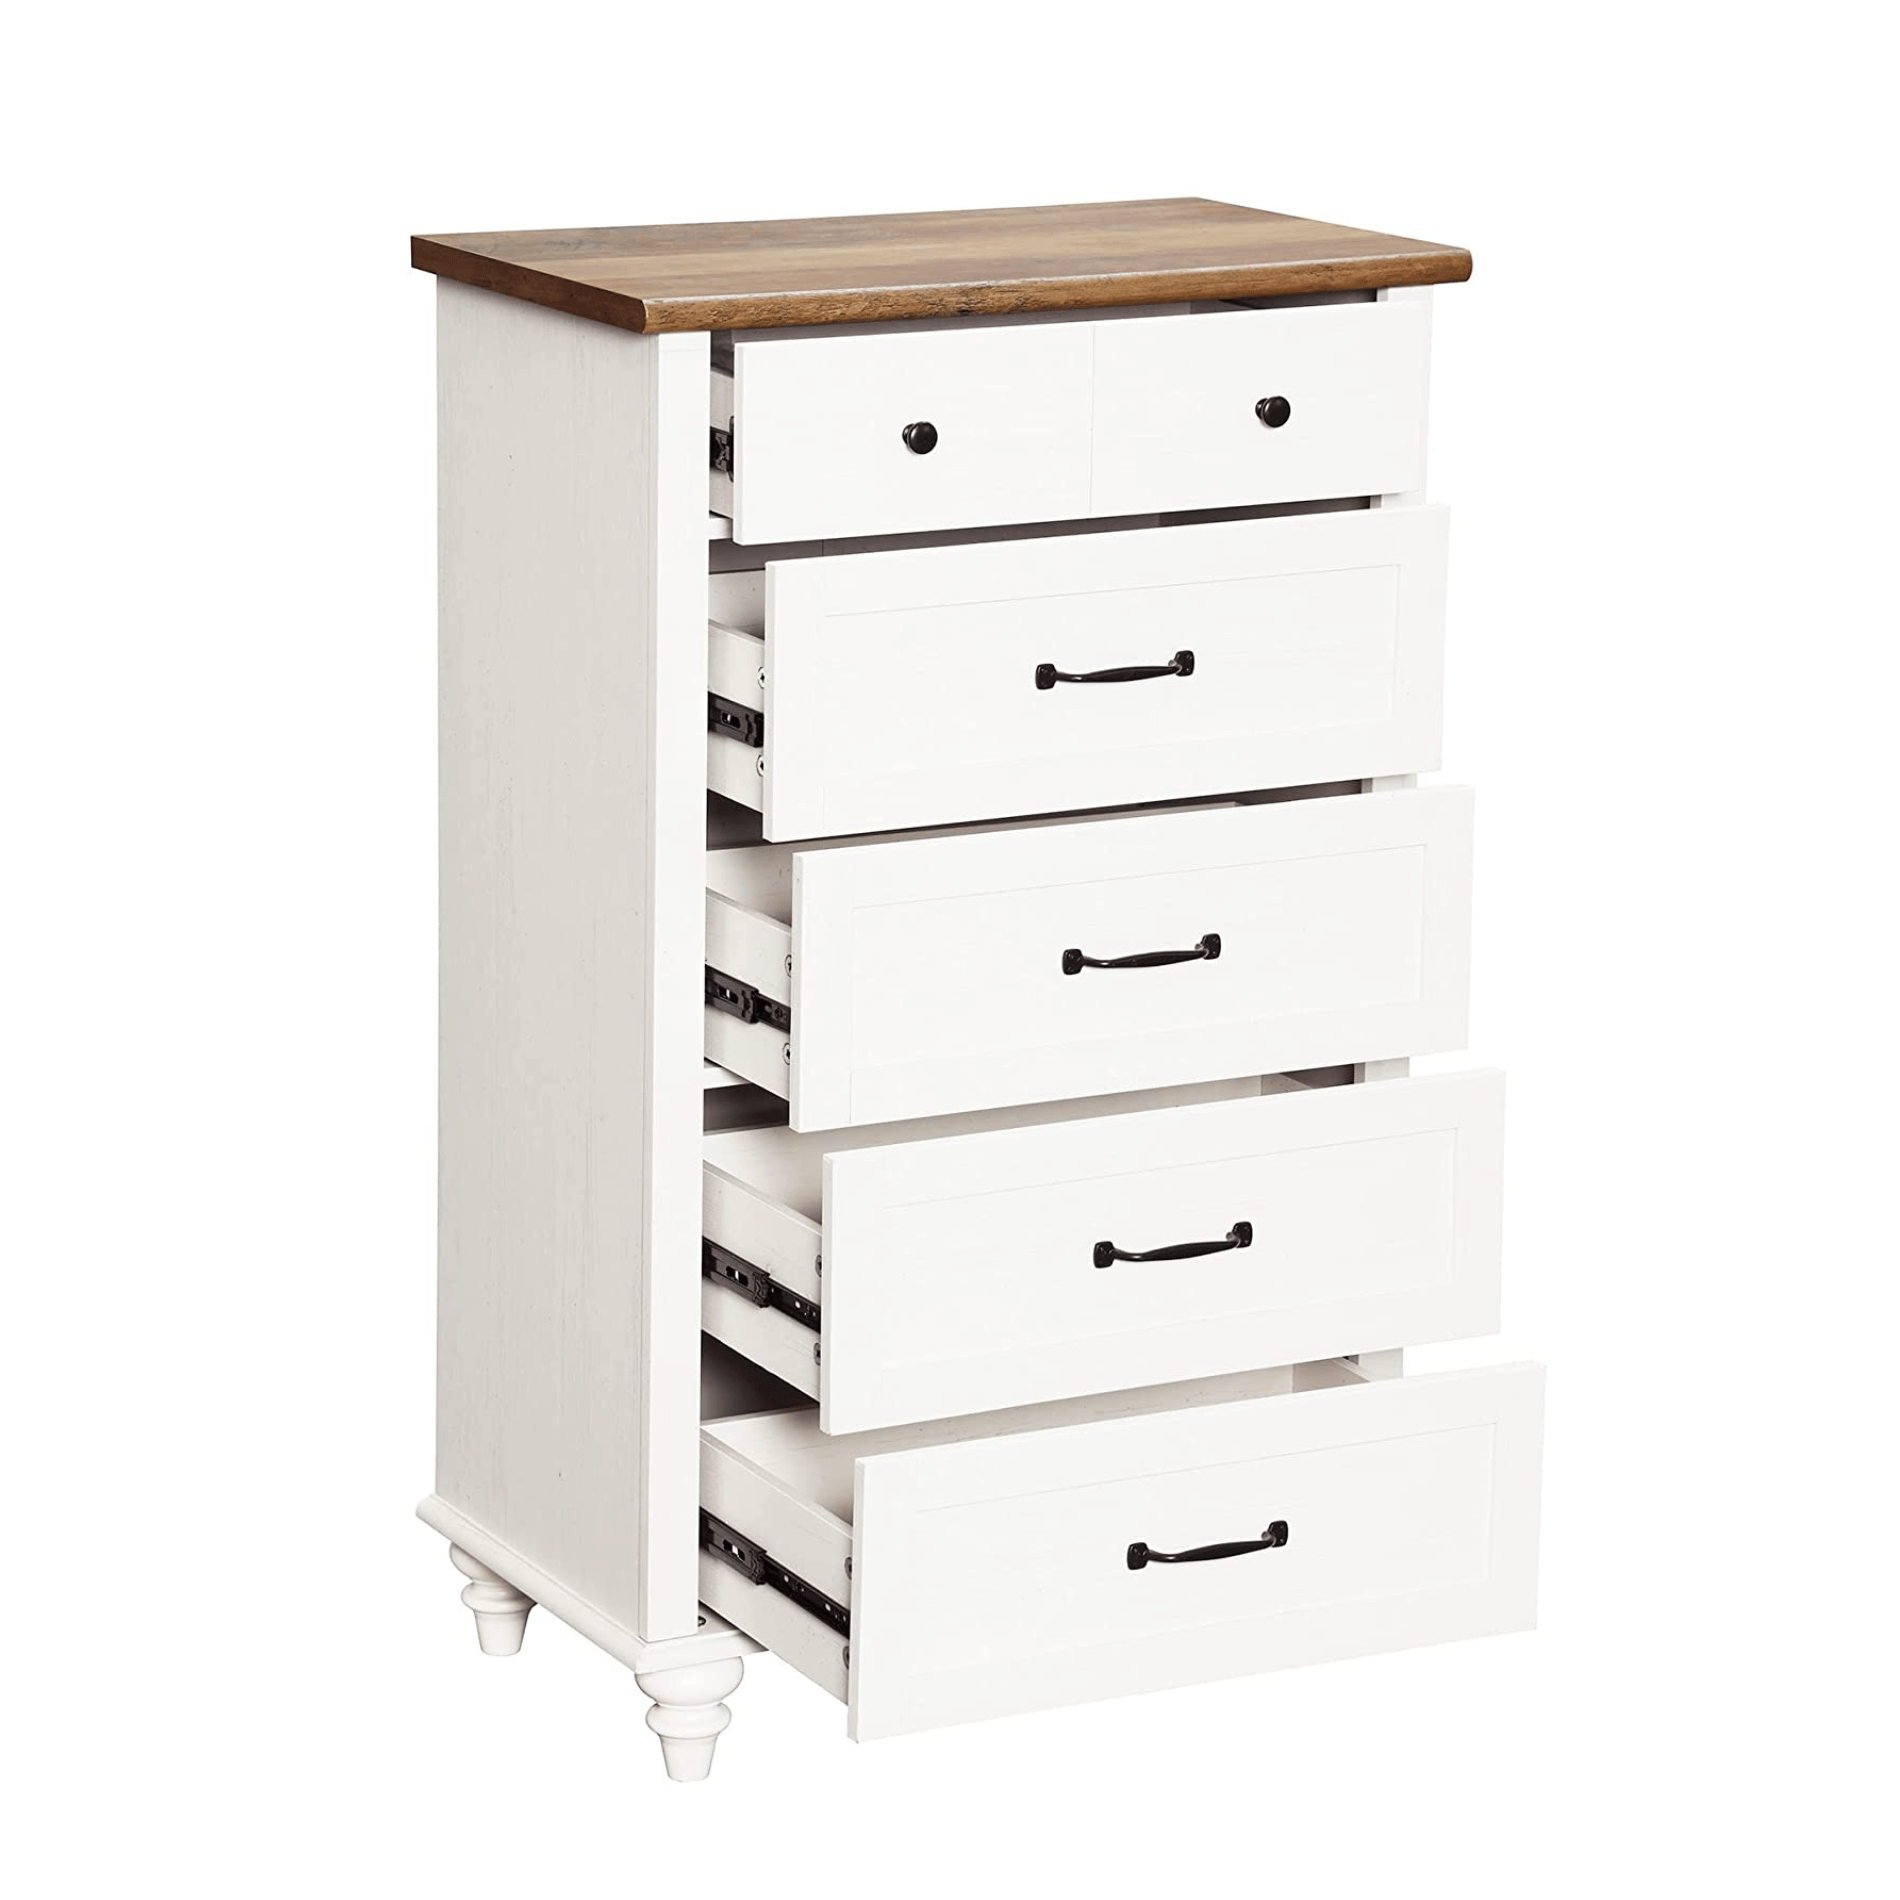 WAMPAT 27 Small Dresser for Bedroom with 5 Drawers, Tall Kids Dresser